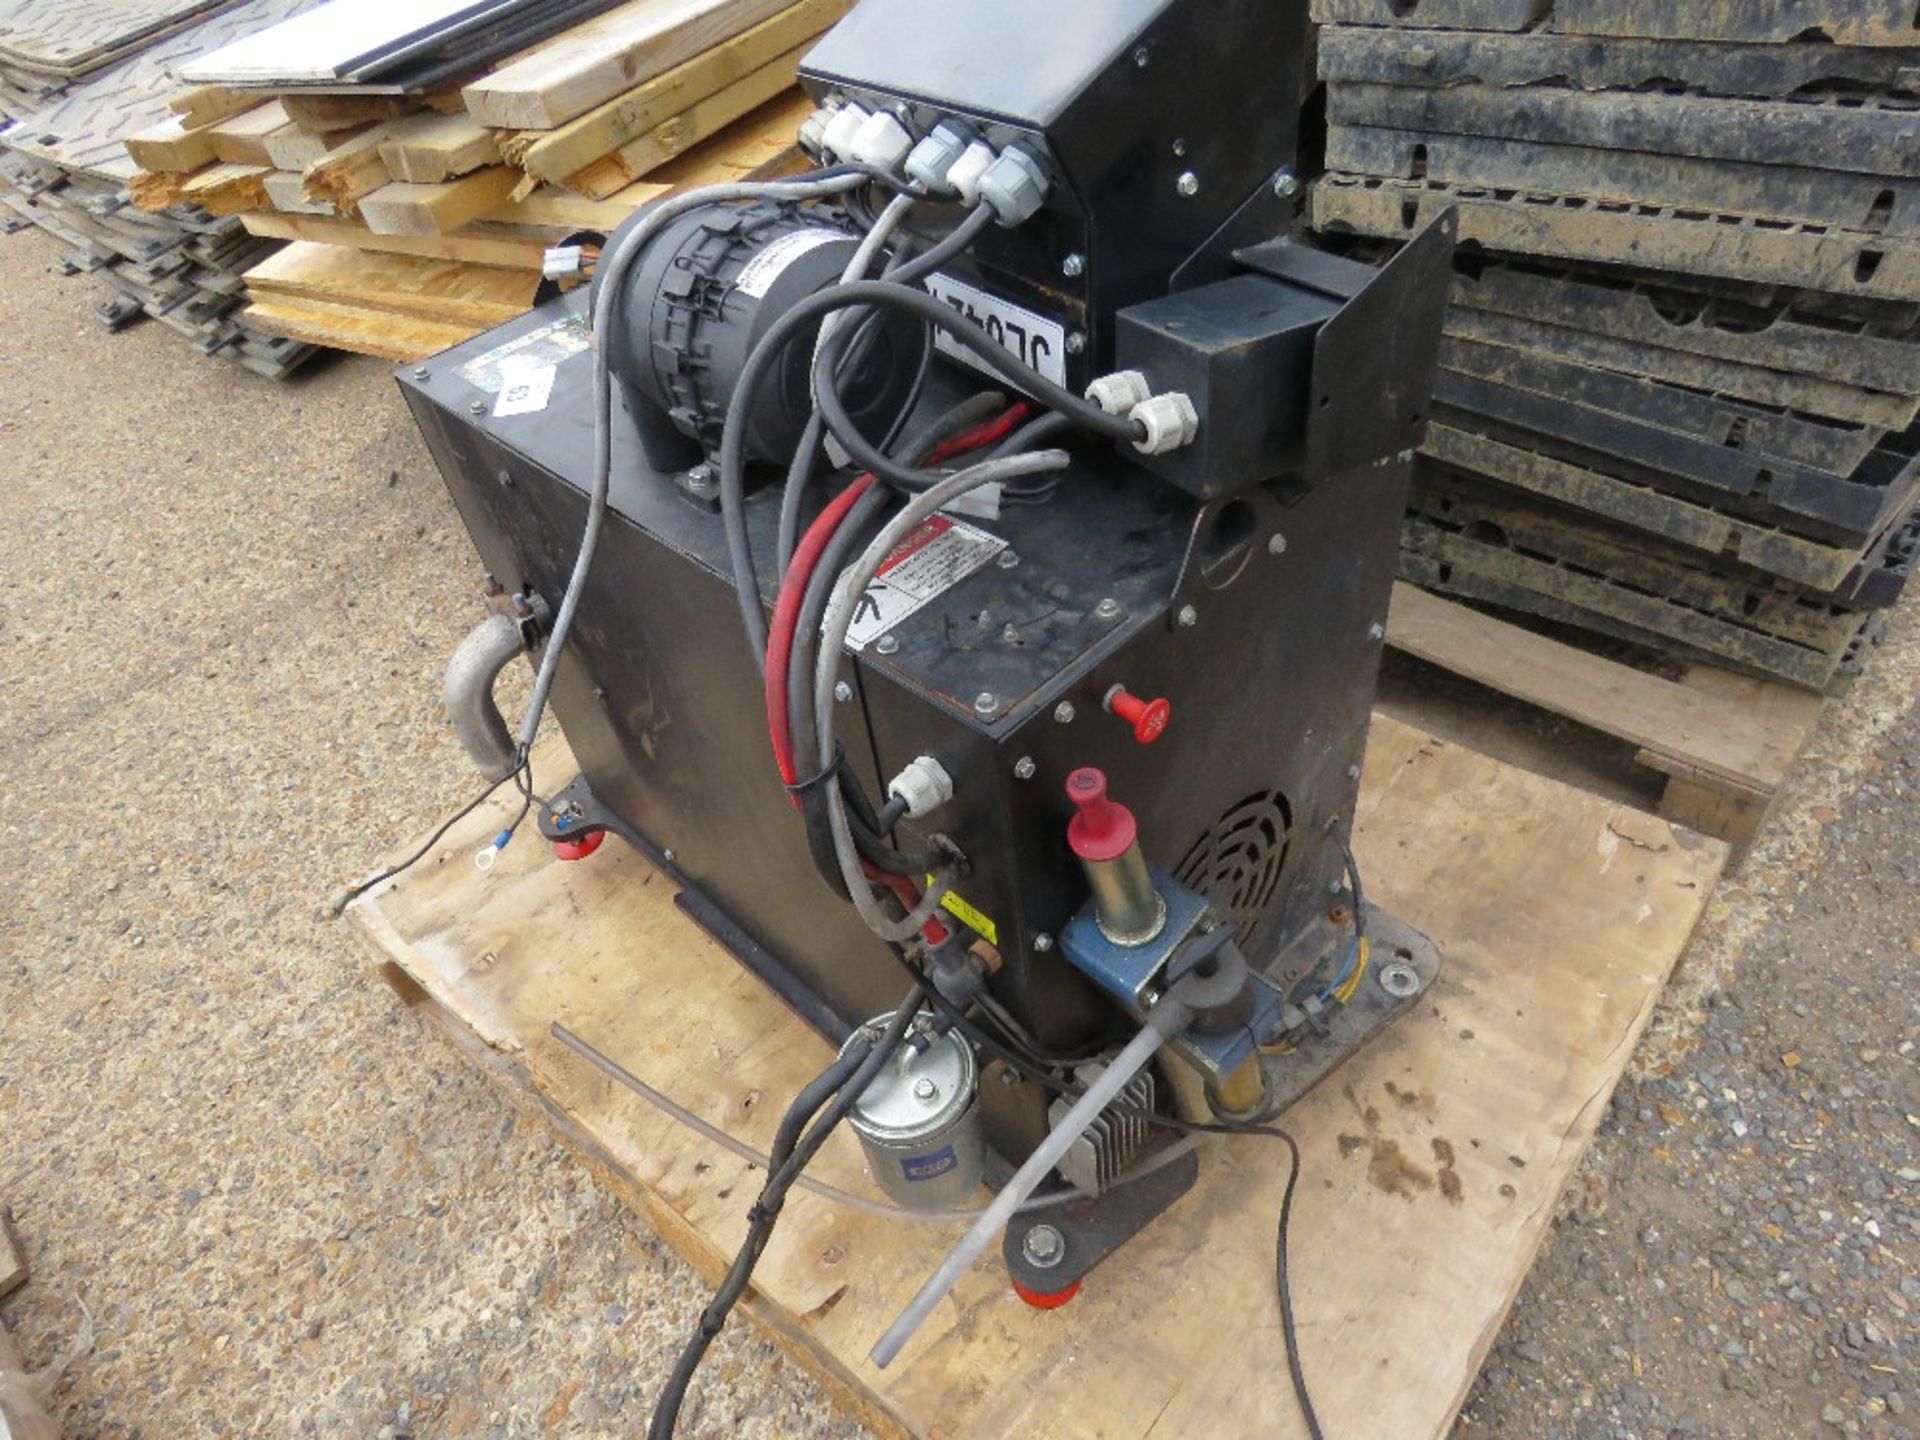 HATZ DIESEL ENGINED PACKAGED GENERATOR SET WITH CONTROL UNIT, 3.1KW RATED OUTPUT. - Image 3 of 5